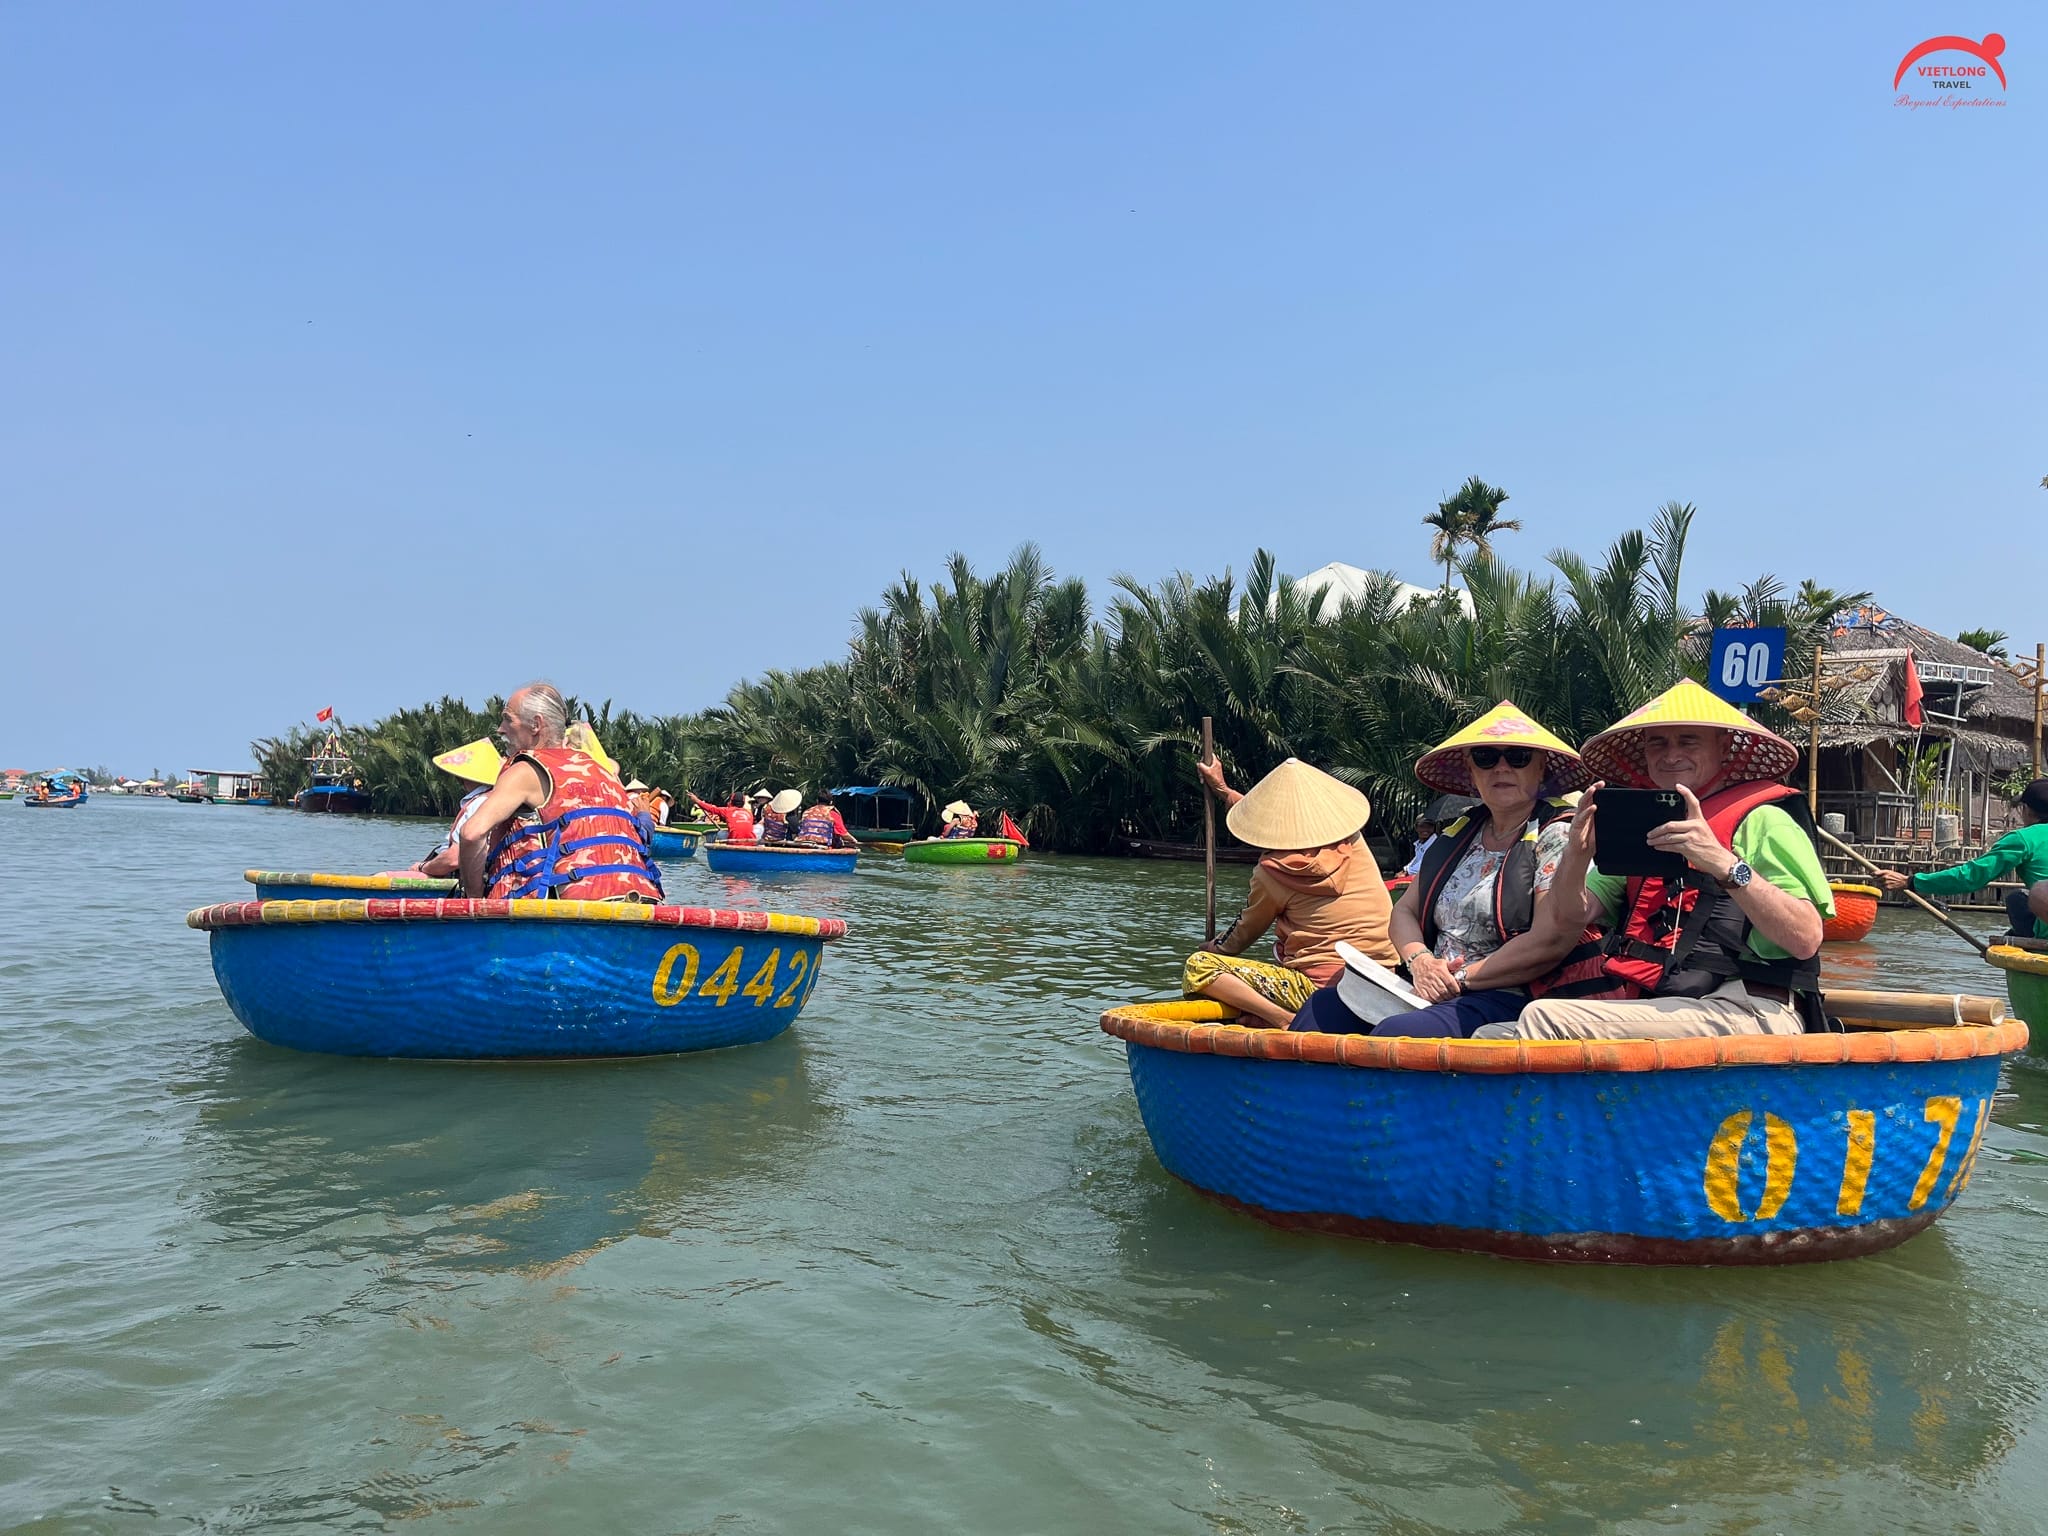 A Family Holiday in Vietnam and Cambodia – All you need to know